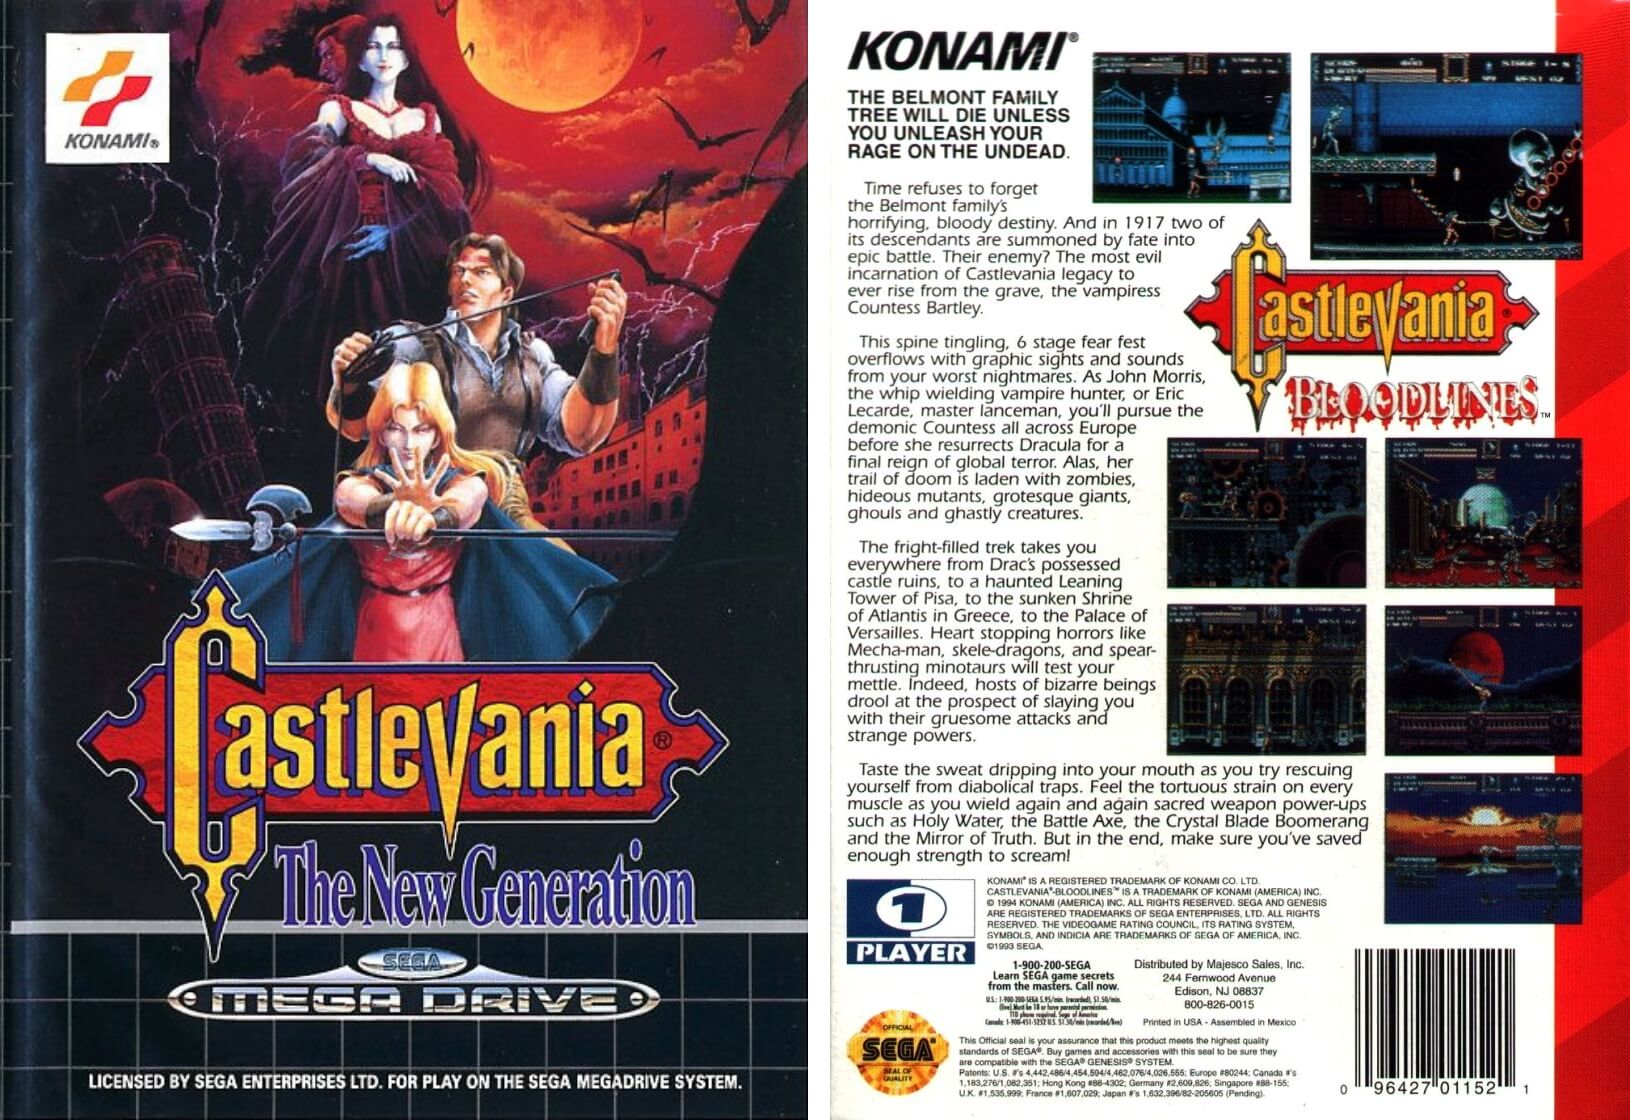 Image For Post | **Packaging**  
The packaging artwork for the North American version was created by Tom Dubois, who also designed the packaging for many other Konami titles outside Japan.

The game was released in Japan on March 18, 1994.

**Anniversary collection**  
On May 16, 2019, the game was included in the Castlevania Anniversary Collection, released for PlayStation 4, Xbox One, Steam and Nintendo Switch, marking the first time that the game has ever been re-released in any form.

**Mega Drive Mini release**  
On September 19, 2019, the game will be included in the Sega Genesis Mini (Sega Mega Drive Mini in Europe and Japan).

**Alternate Titles**  
    "Vampire Killer" -- Japanese Title
    "Castlevania: The New Generation" -- European Title
    "バンパイアキラー" -- Japanese spelling